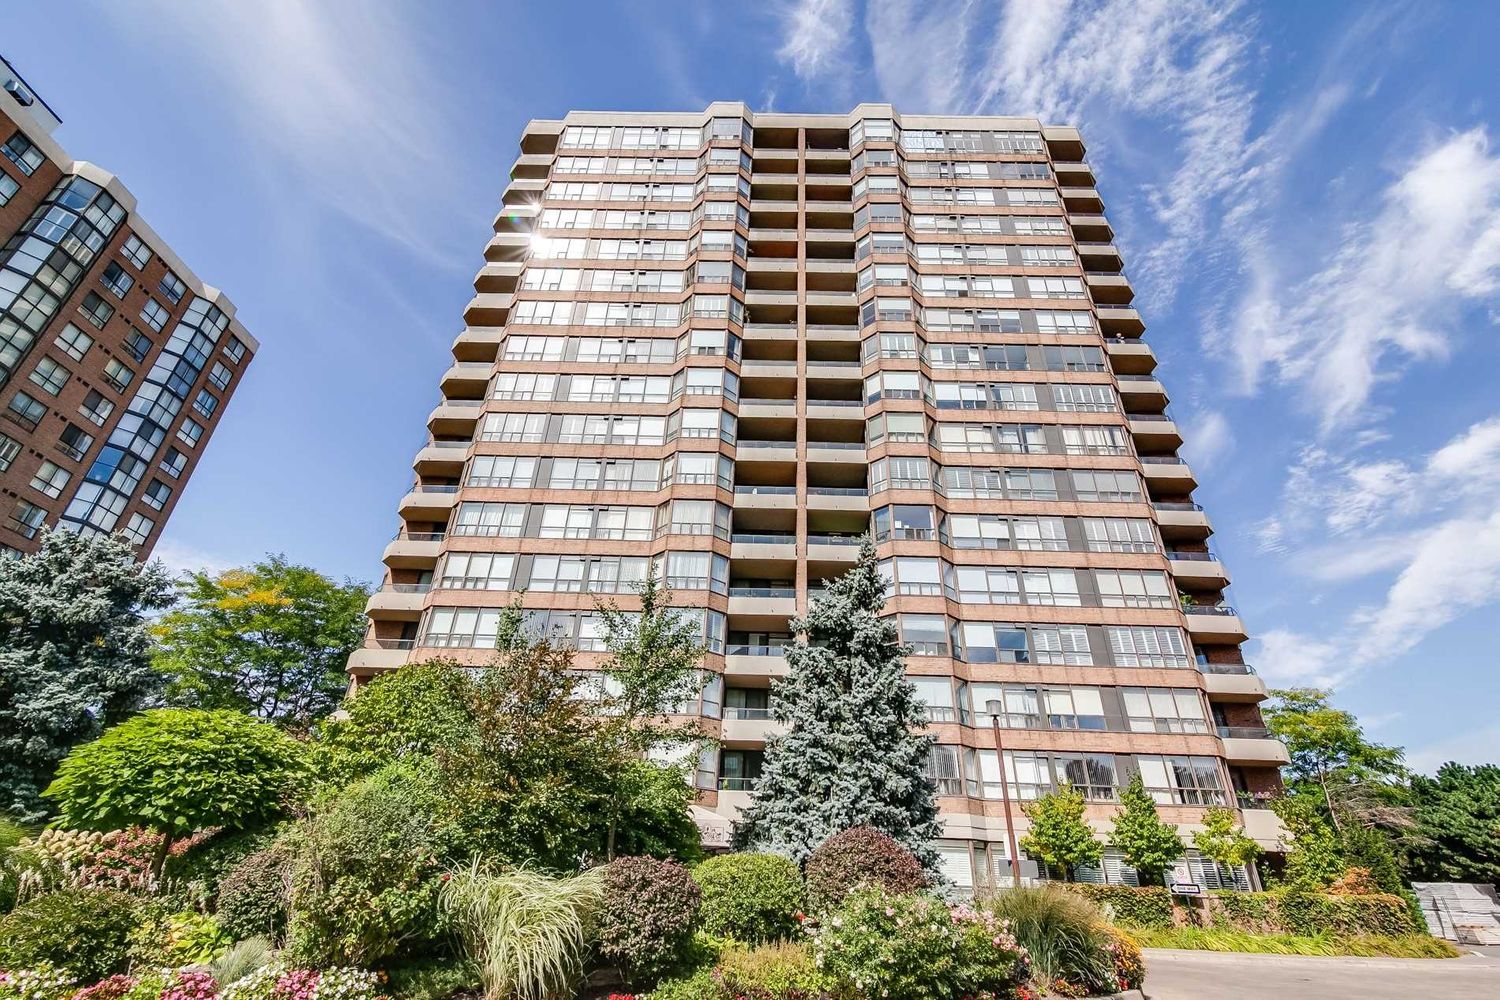 268 Ridley Boulevard. Ridley Boulevard II Condos is located in  North York, Toronto - image #2 of 3